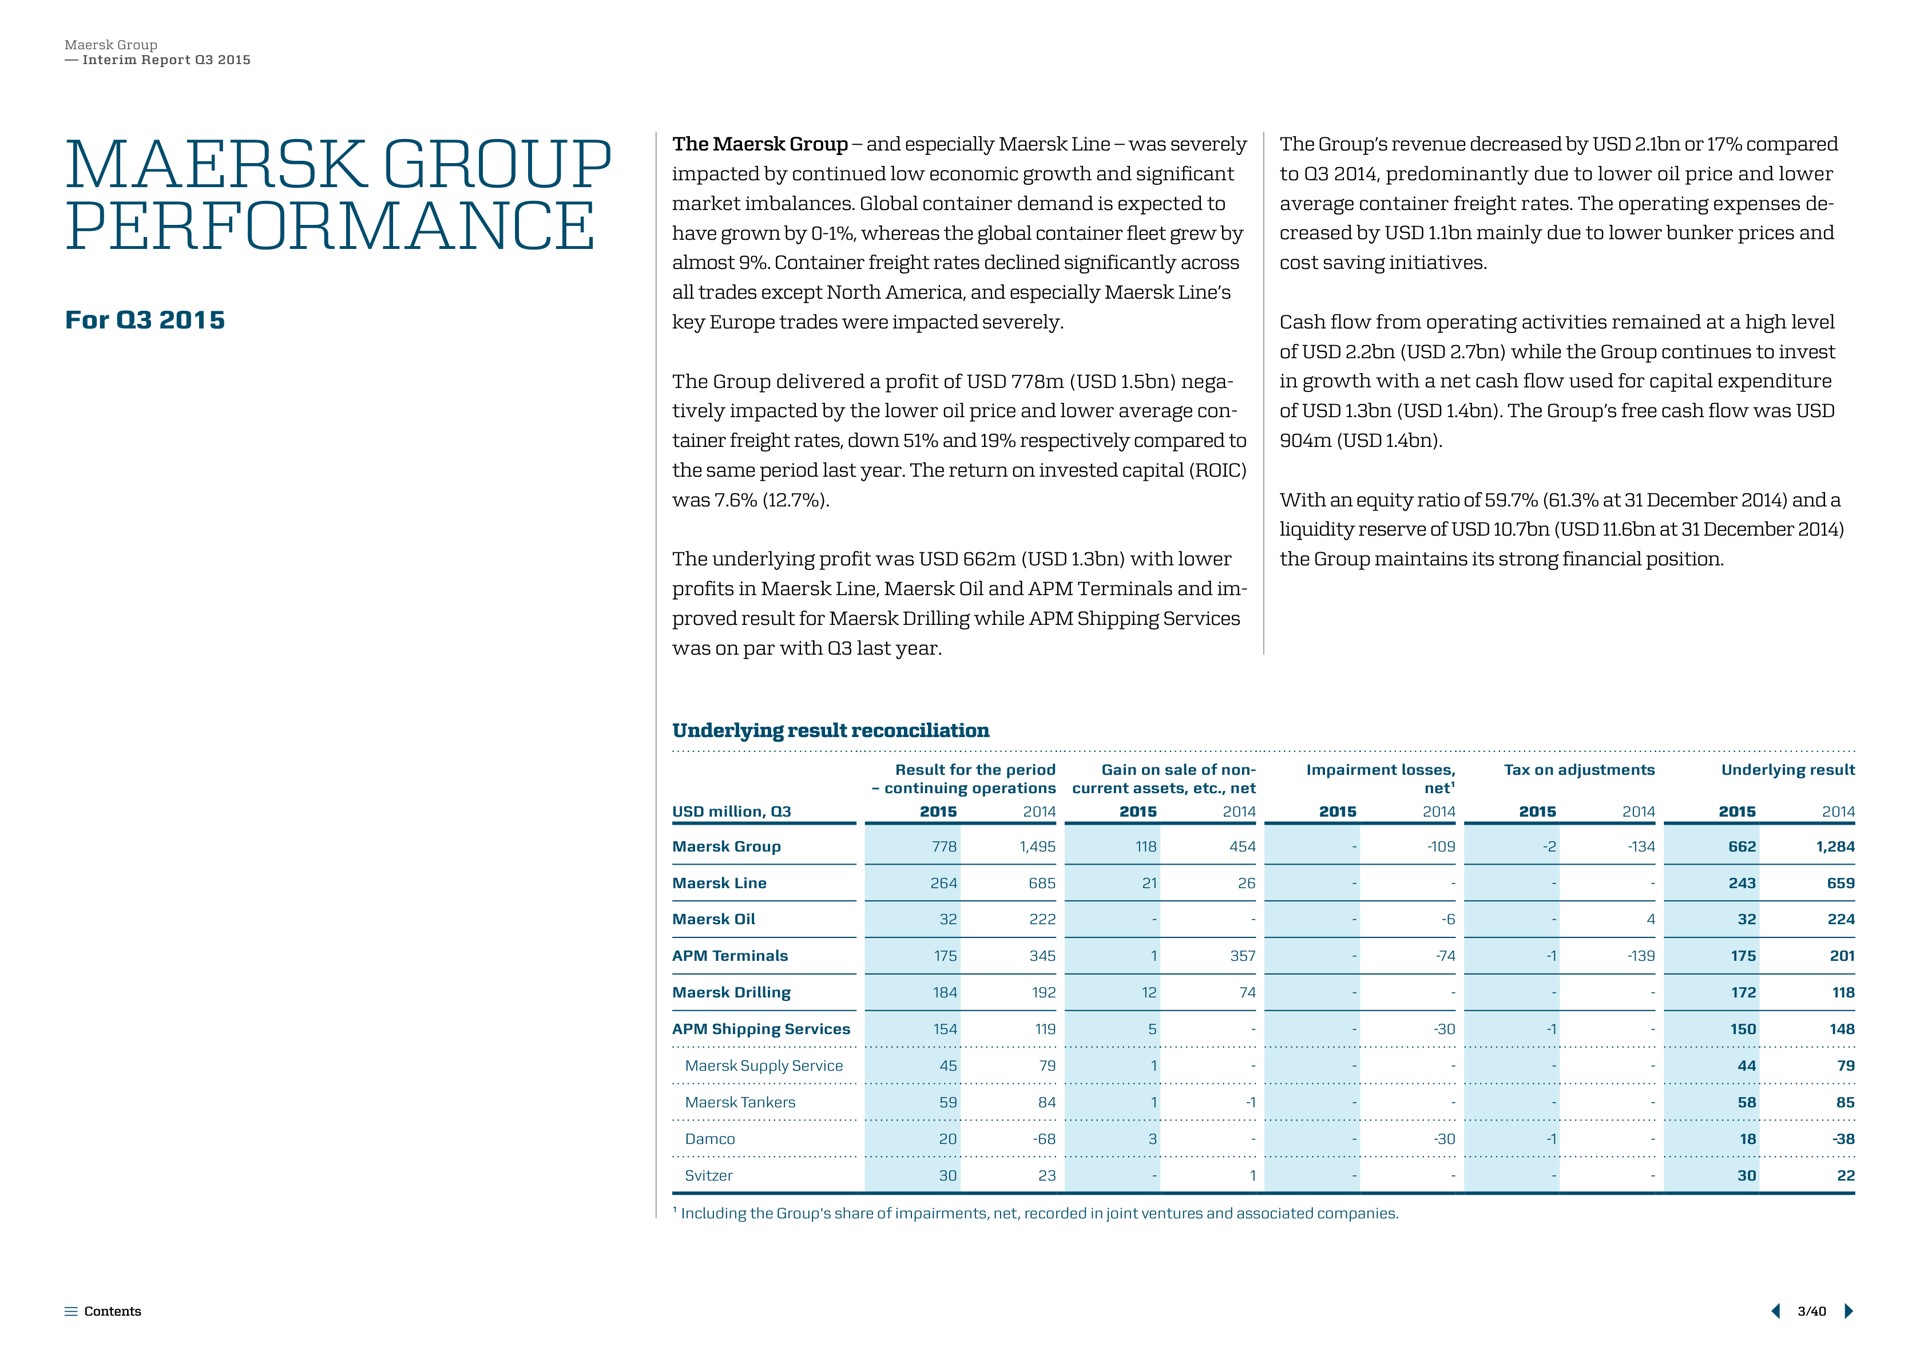 group performance for impacted by continued low economic growth and significant to predominantly due to lower oil price and lower have grown by whereas the global container fleet grew by creased by mainly due to lower bunker prices and almost container freight rates declined significantly across key trades were impacted severely cash flow from operating activities remained at a high level the delivered a profit of impacted by the lower oil price and lower average con the same period last year the return on invested capital the maintains its strong financial position proved result drilling while shipping services underlying result reconciliation | Maersk